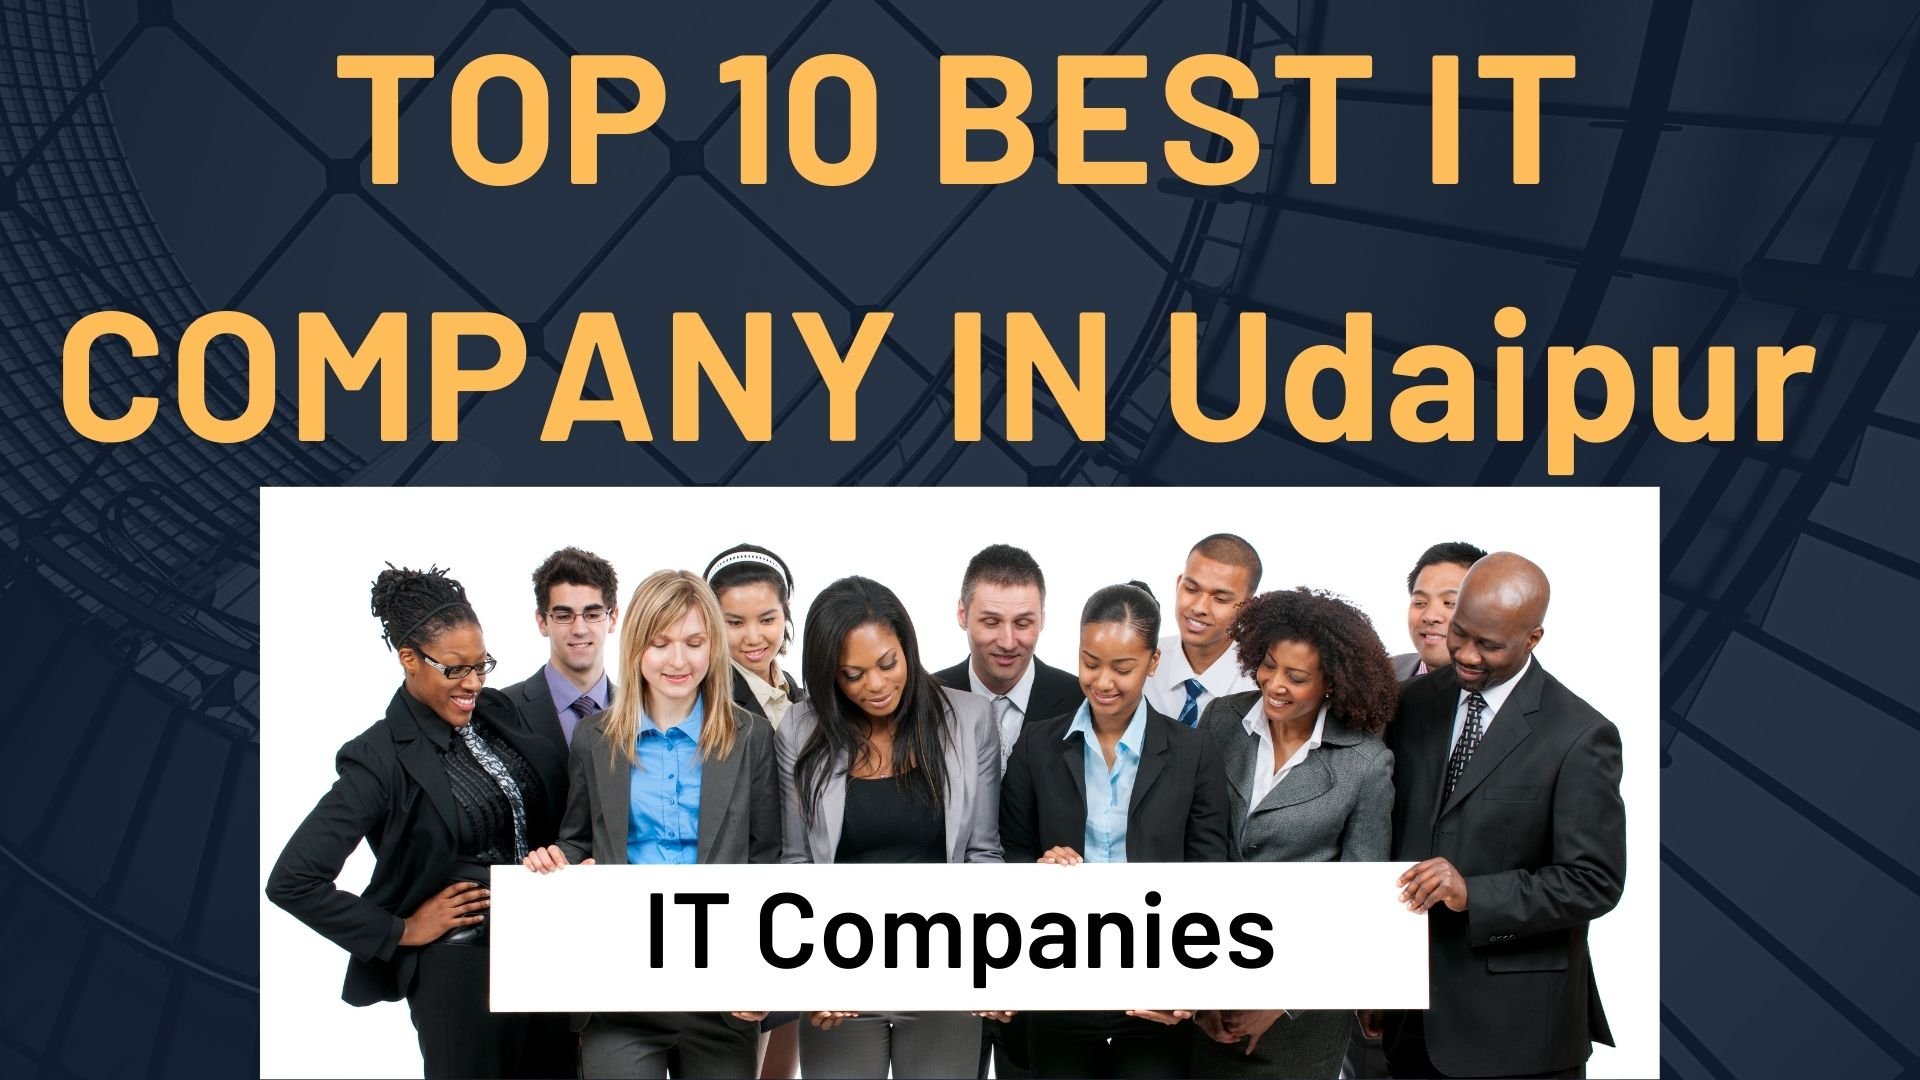 Top 10 IT Companies in Udaipur 2021